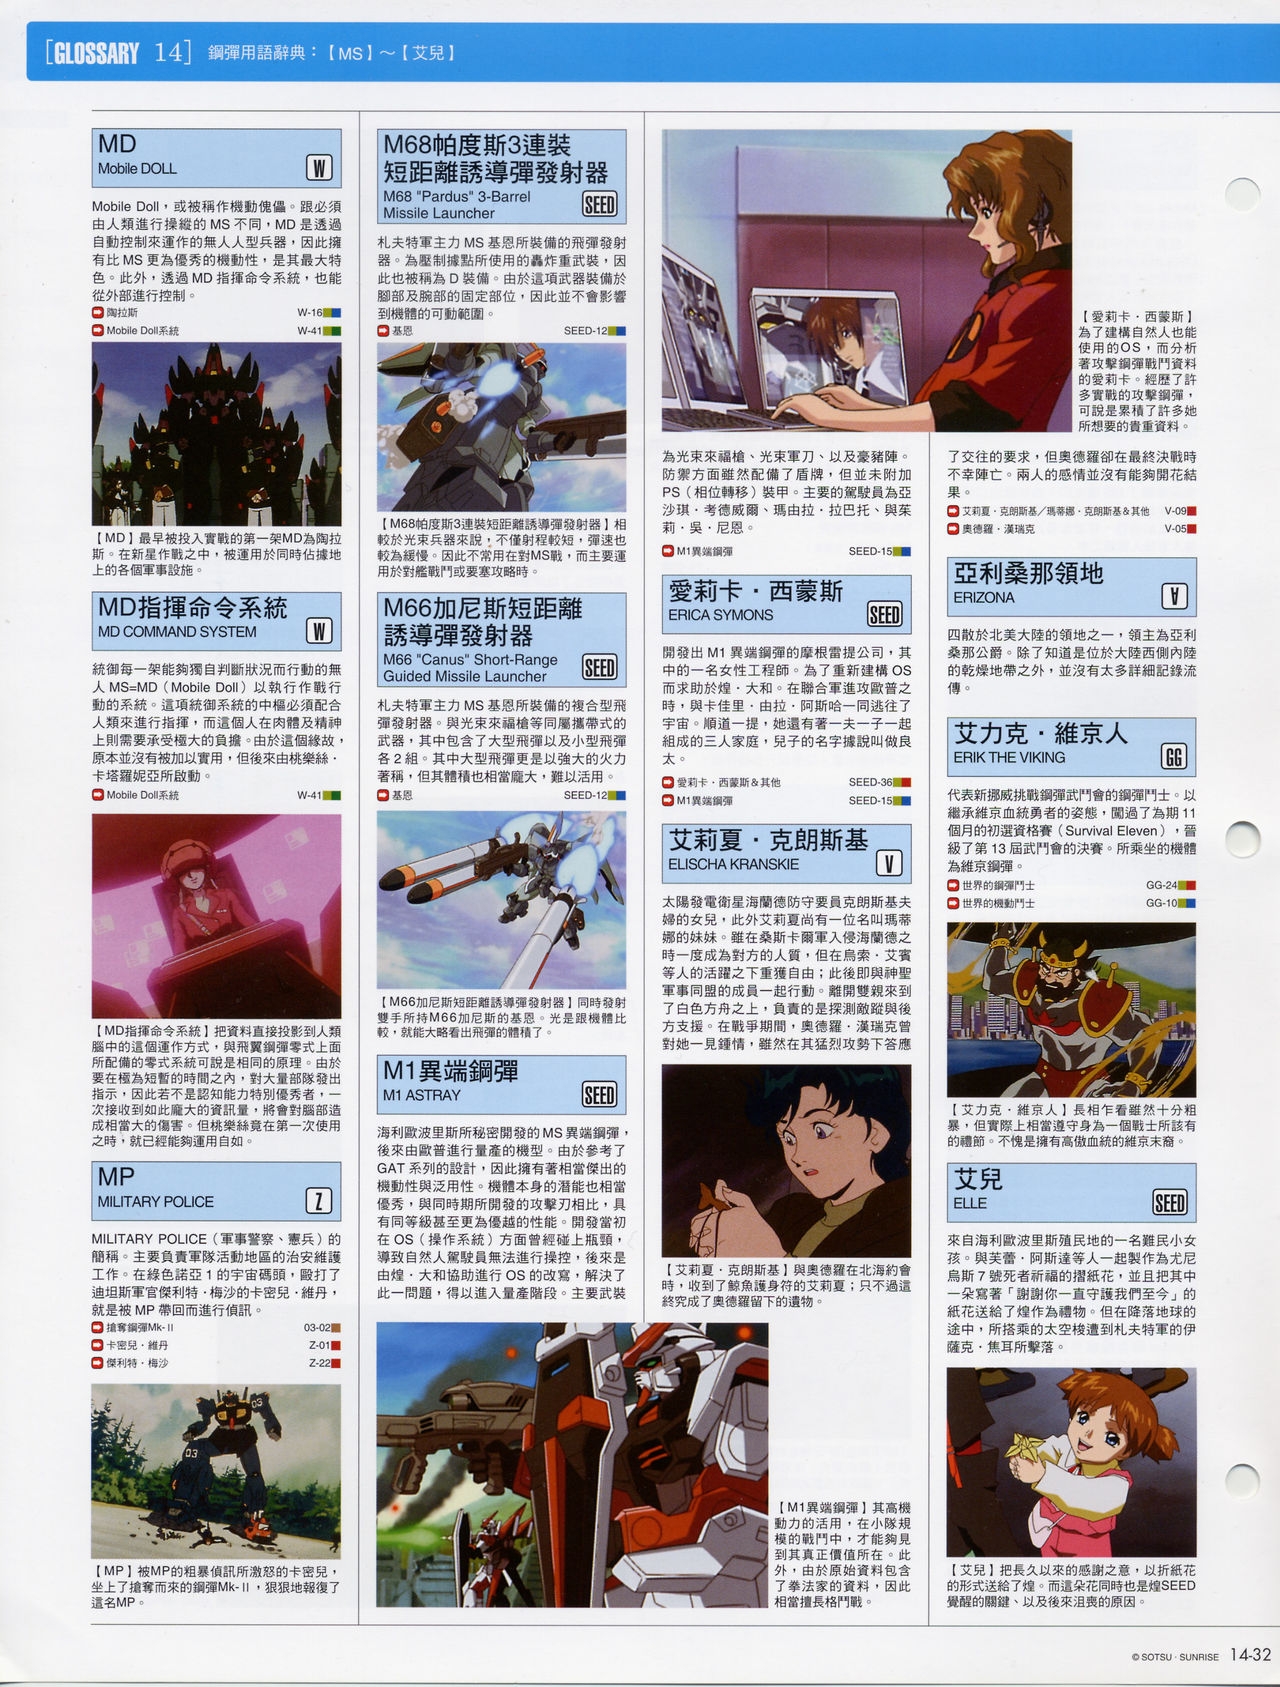 The Official Gundam Fact File - 014 [Chinese] 34